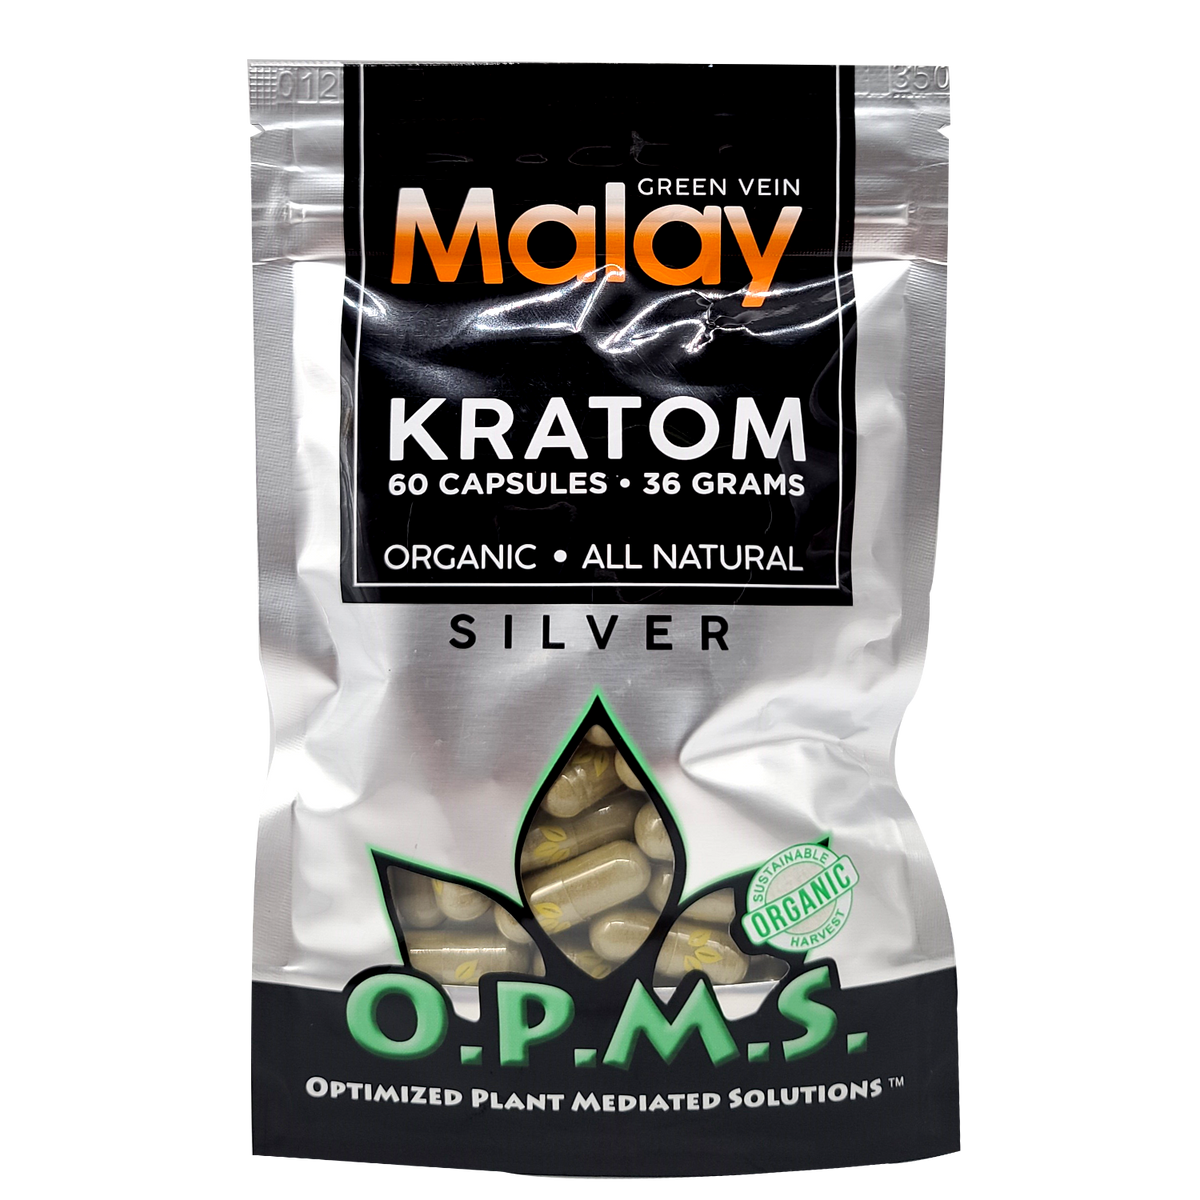 60ct OPMS Silver Green Vein Malay Kratom Extract Capsules